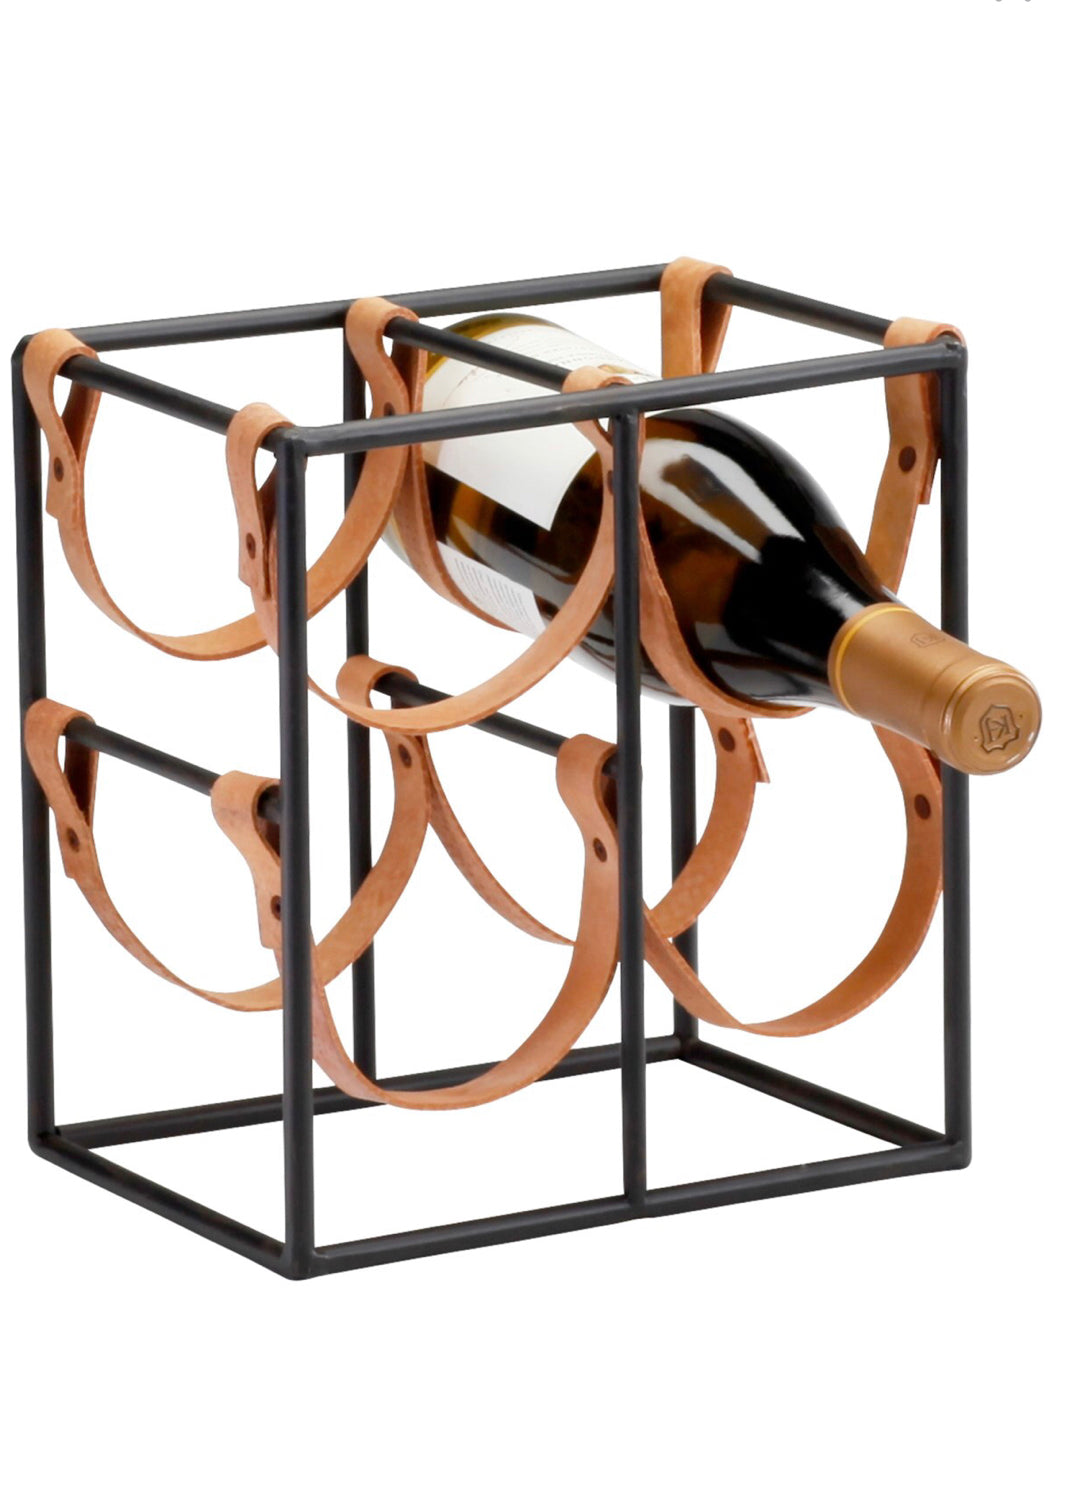 Contemporary yet rustic with a fully functional design this beautiful, wine rack holds 4 bottles, individually. The sturdy construction and clever design make it hard for bottles to fall out, even if the rack is bumped. Your delicious wines and other spirits are cradled horizontally to keep corks moist and the contents fresh for your enjoyment.Â Perfect for any western inspired kitchen or any modern-transitional bar design.  Dimensions: H 9.5 x W 8.75 x Depth 6.2